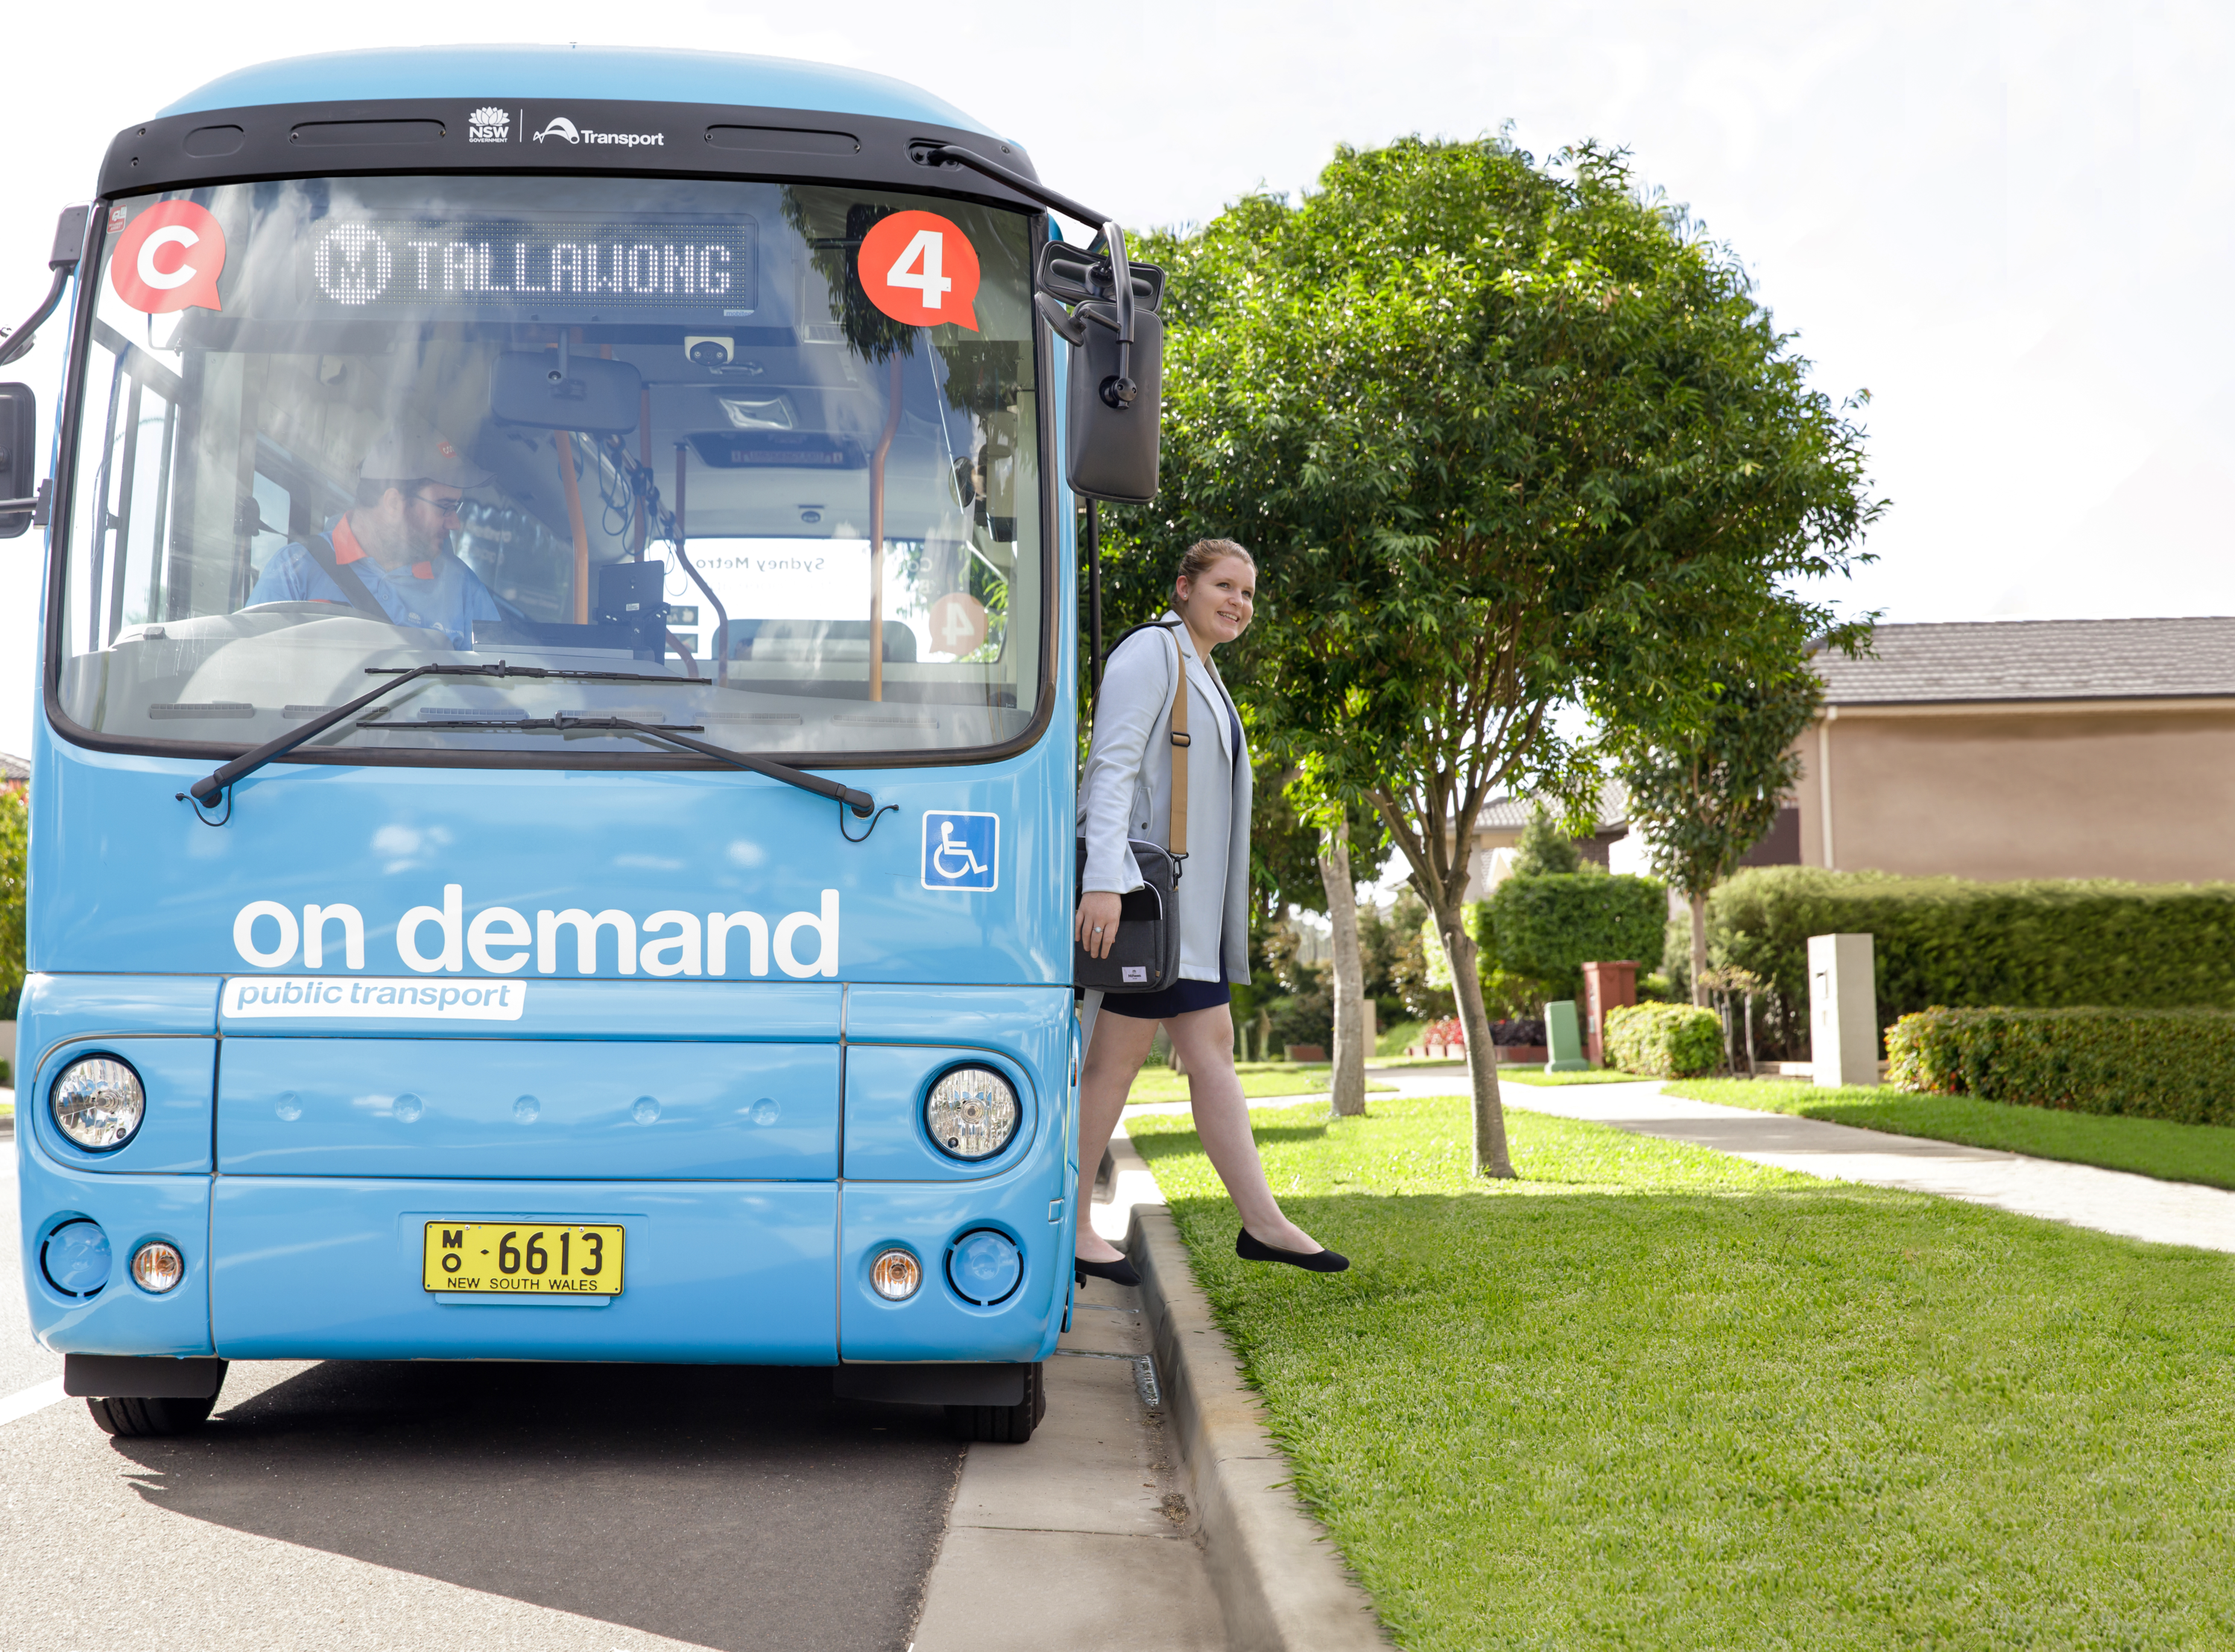 Busways on demand service in Western Sydney reaches a significant milestone